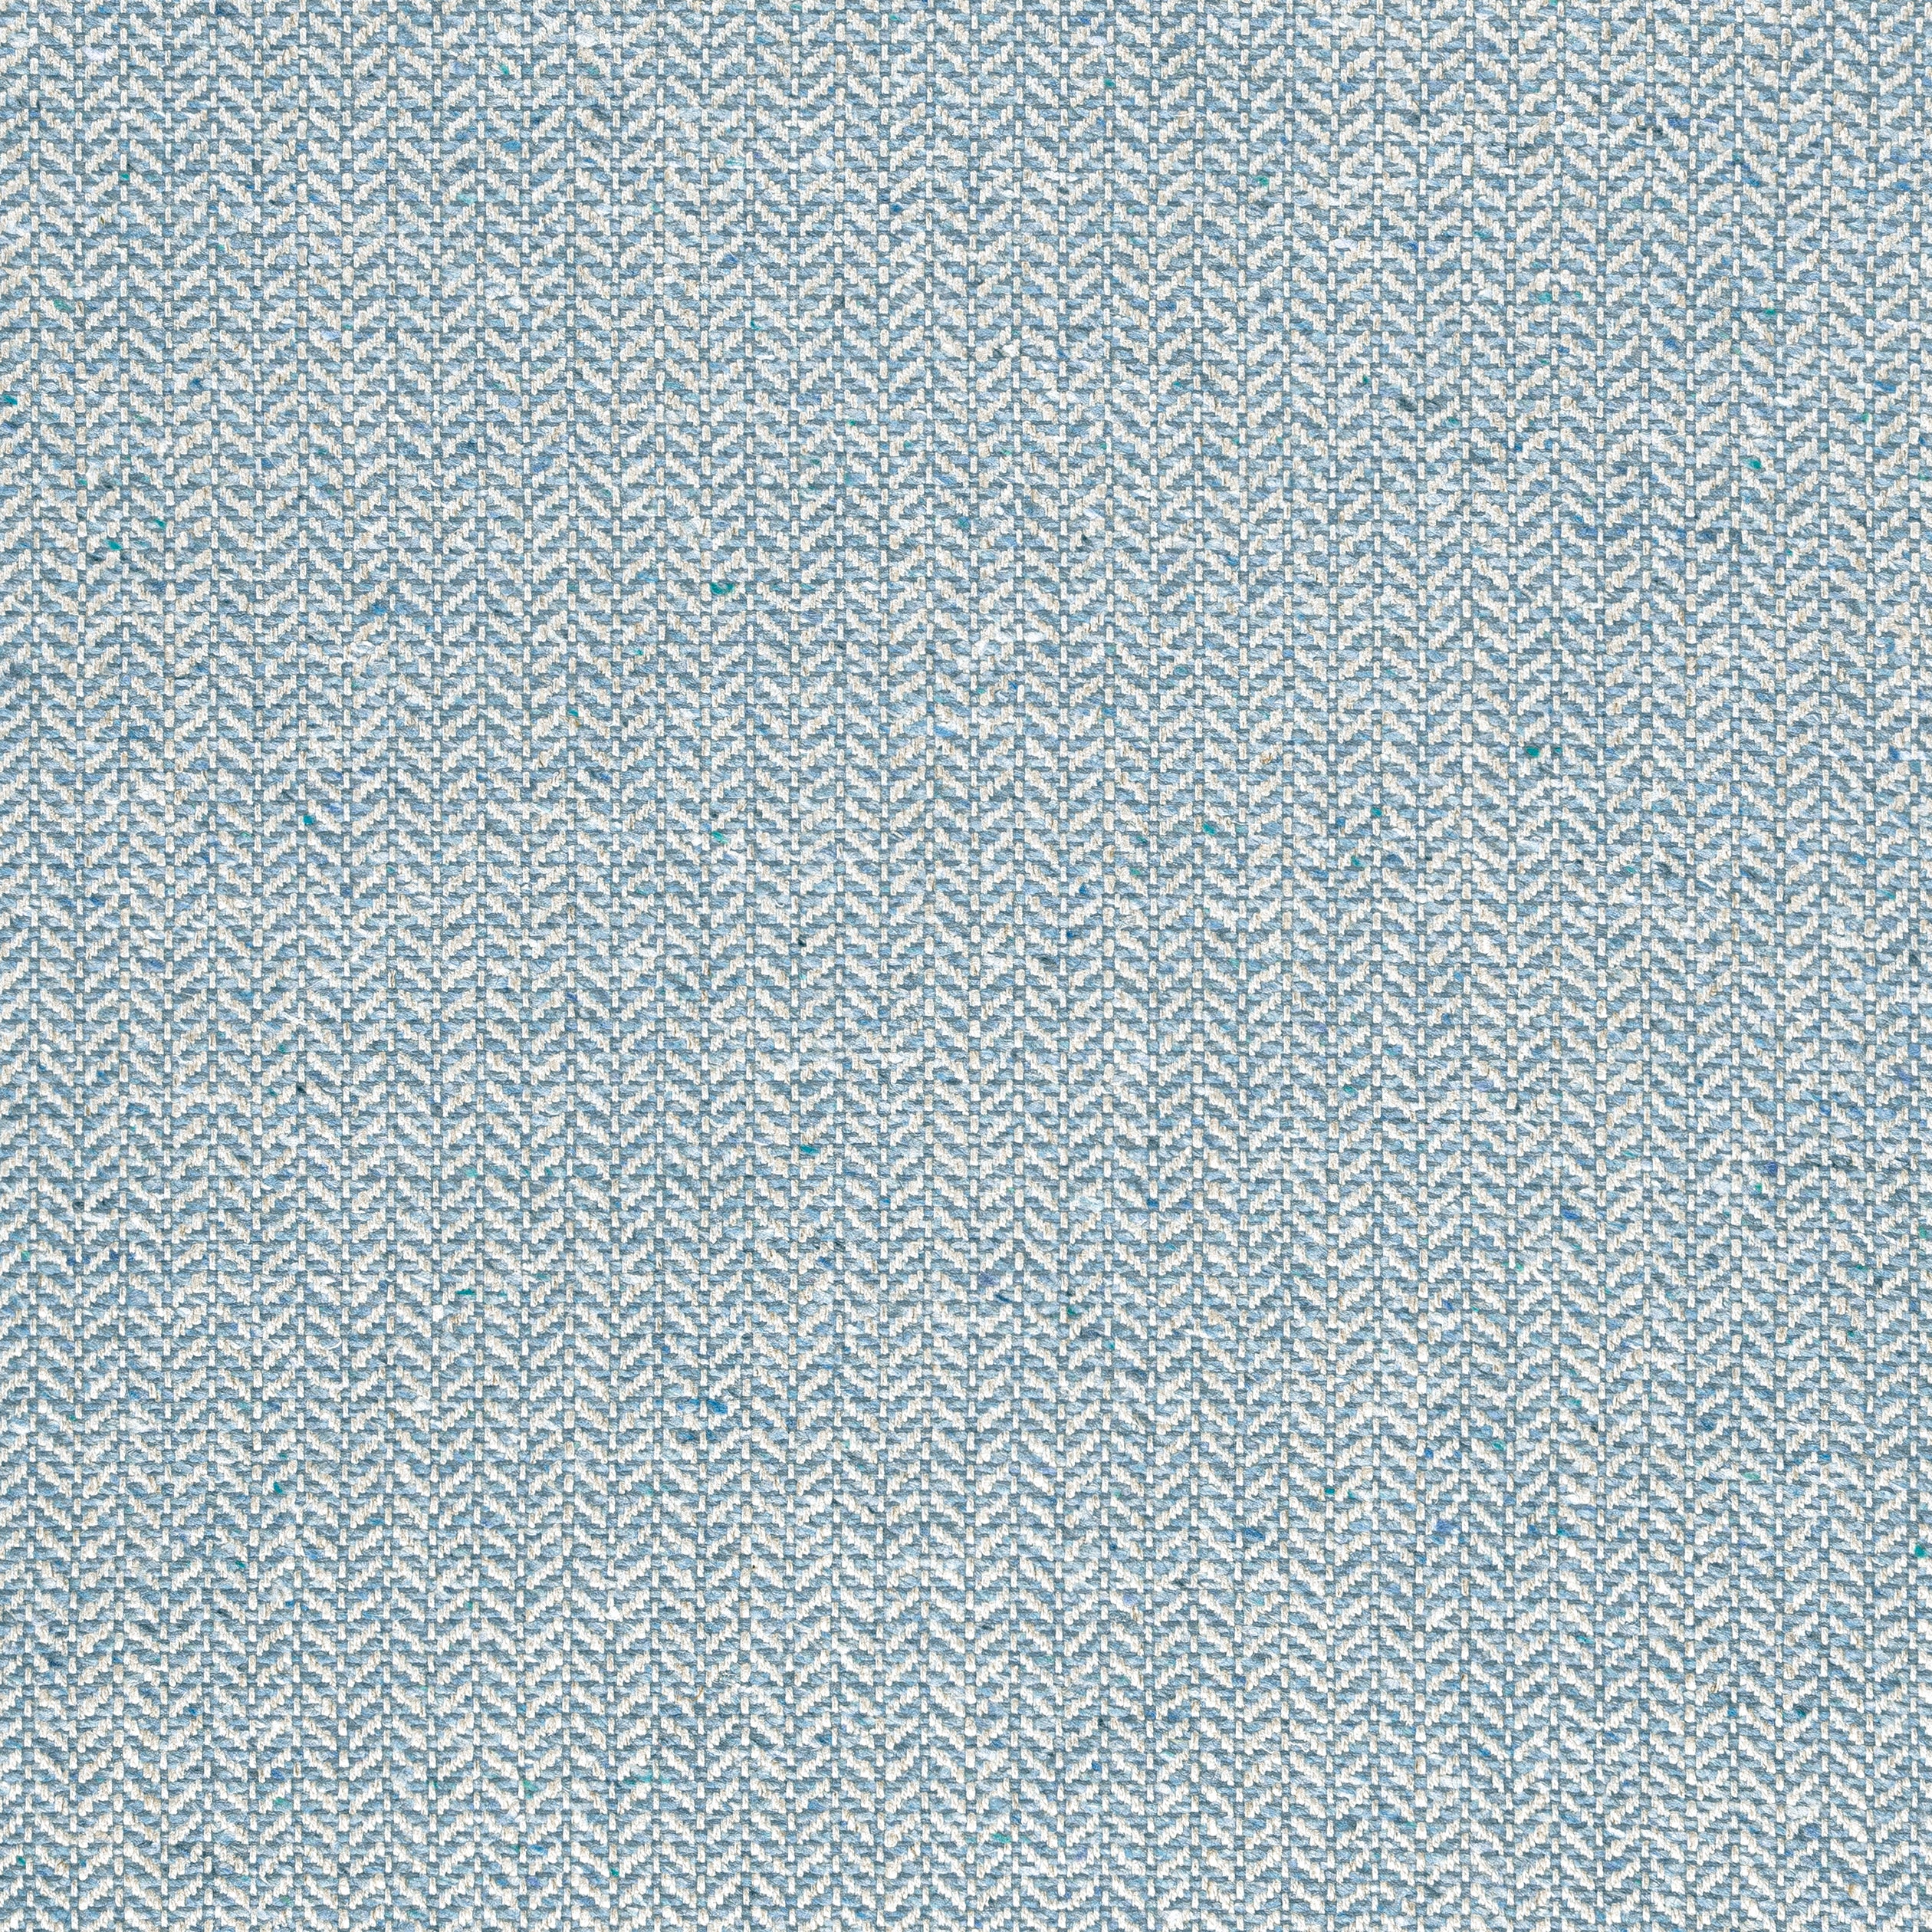 Heath fabric in waterfall color - pattern number W80923 - by Thibaut in the Dunmore collection